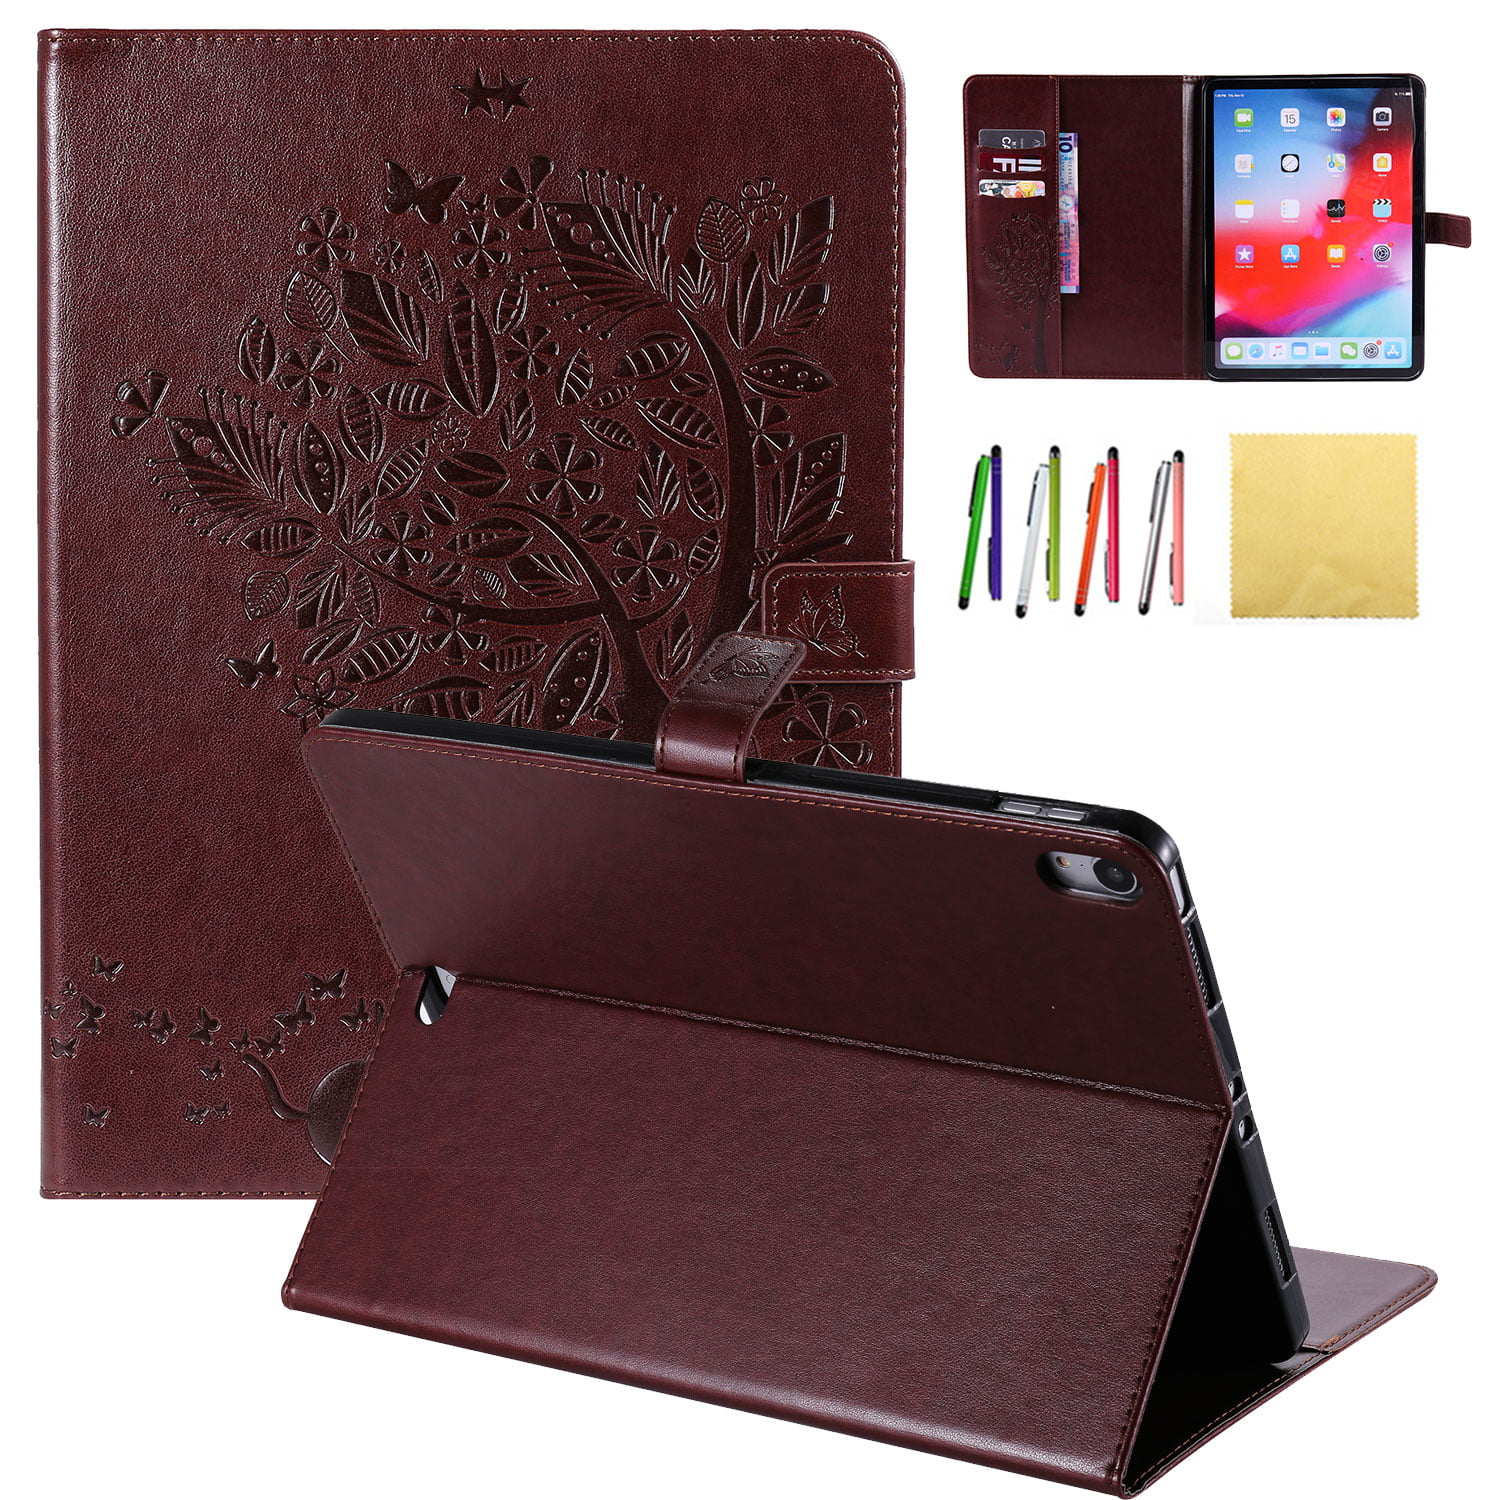 Flip Case for New iPad 9.7 2017,Smart Leather Cover for New iPad 9.7 2017,Herzzer Retro Pretty Tree Butterfly Cat Design Wallet Folio Case Full Body PU Leather Protective Stand Cover with Inner Soft Silicone Shell for New iPad 9.7 2017 1 x Free Black Cel